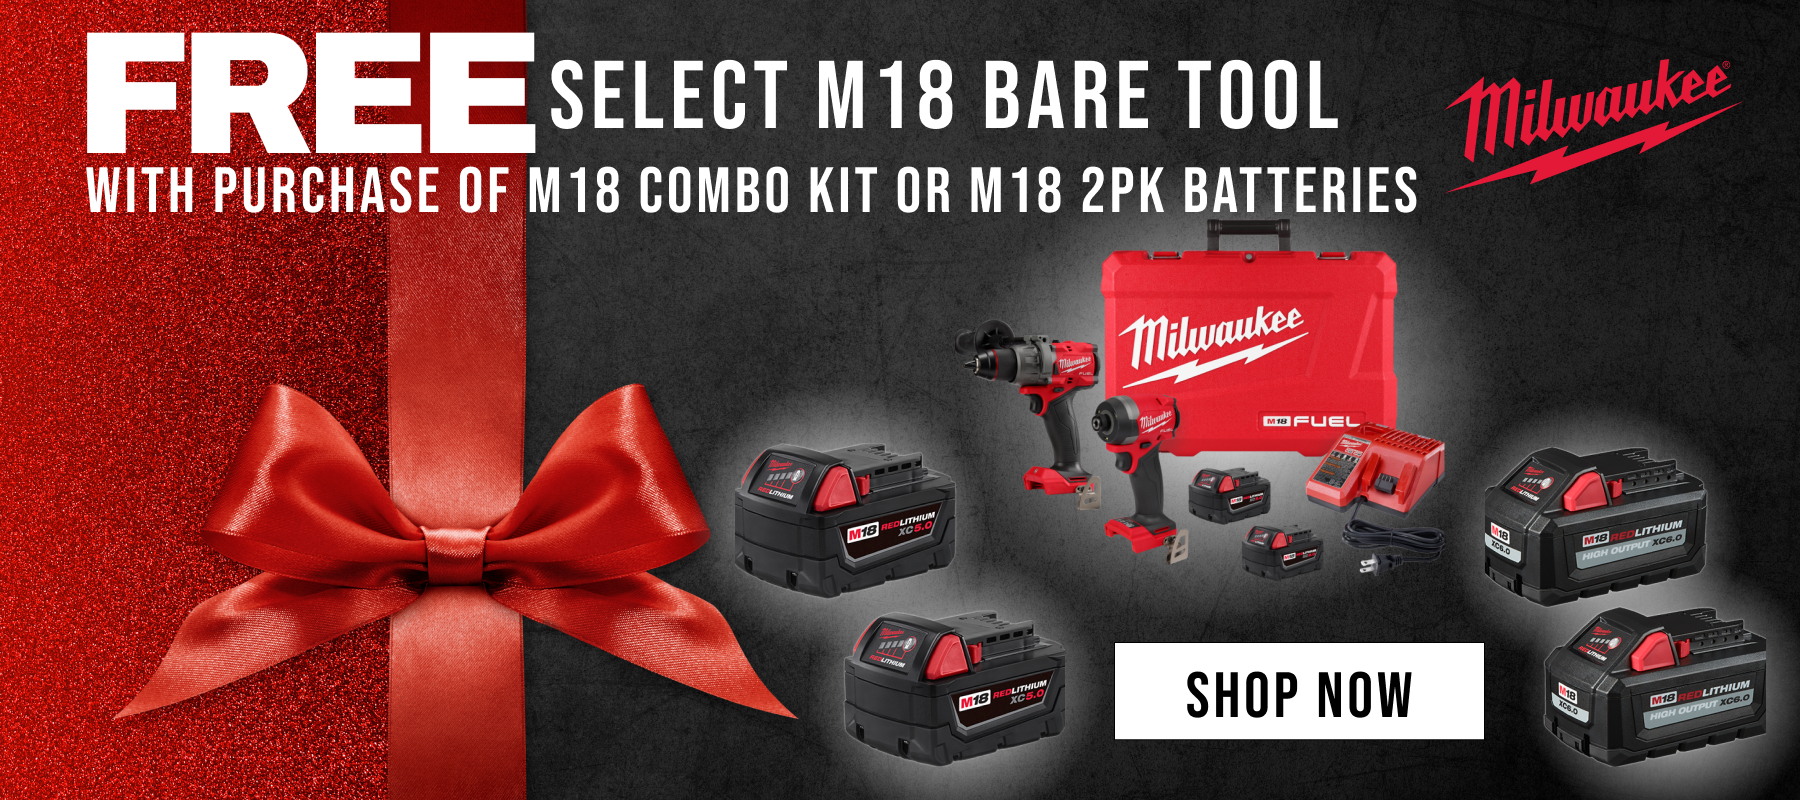 Milwaukee // FREE Select M18 Bare Tool with Purchase of M18 Combo Kit or M18 2pk Batteries // SHOP NOW